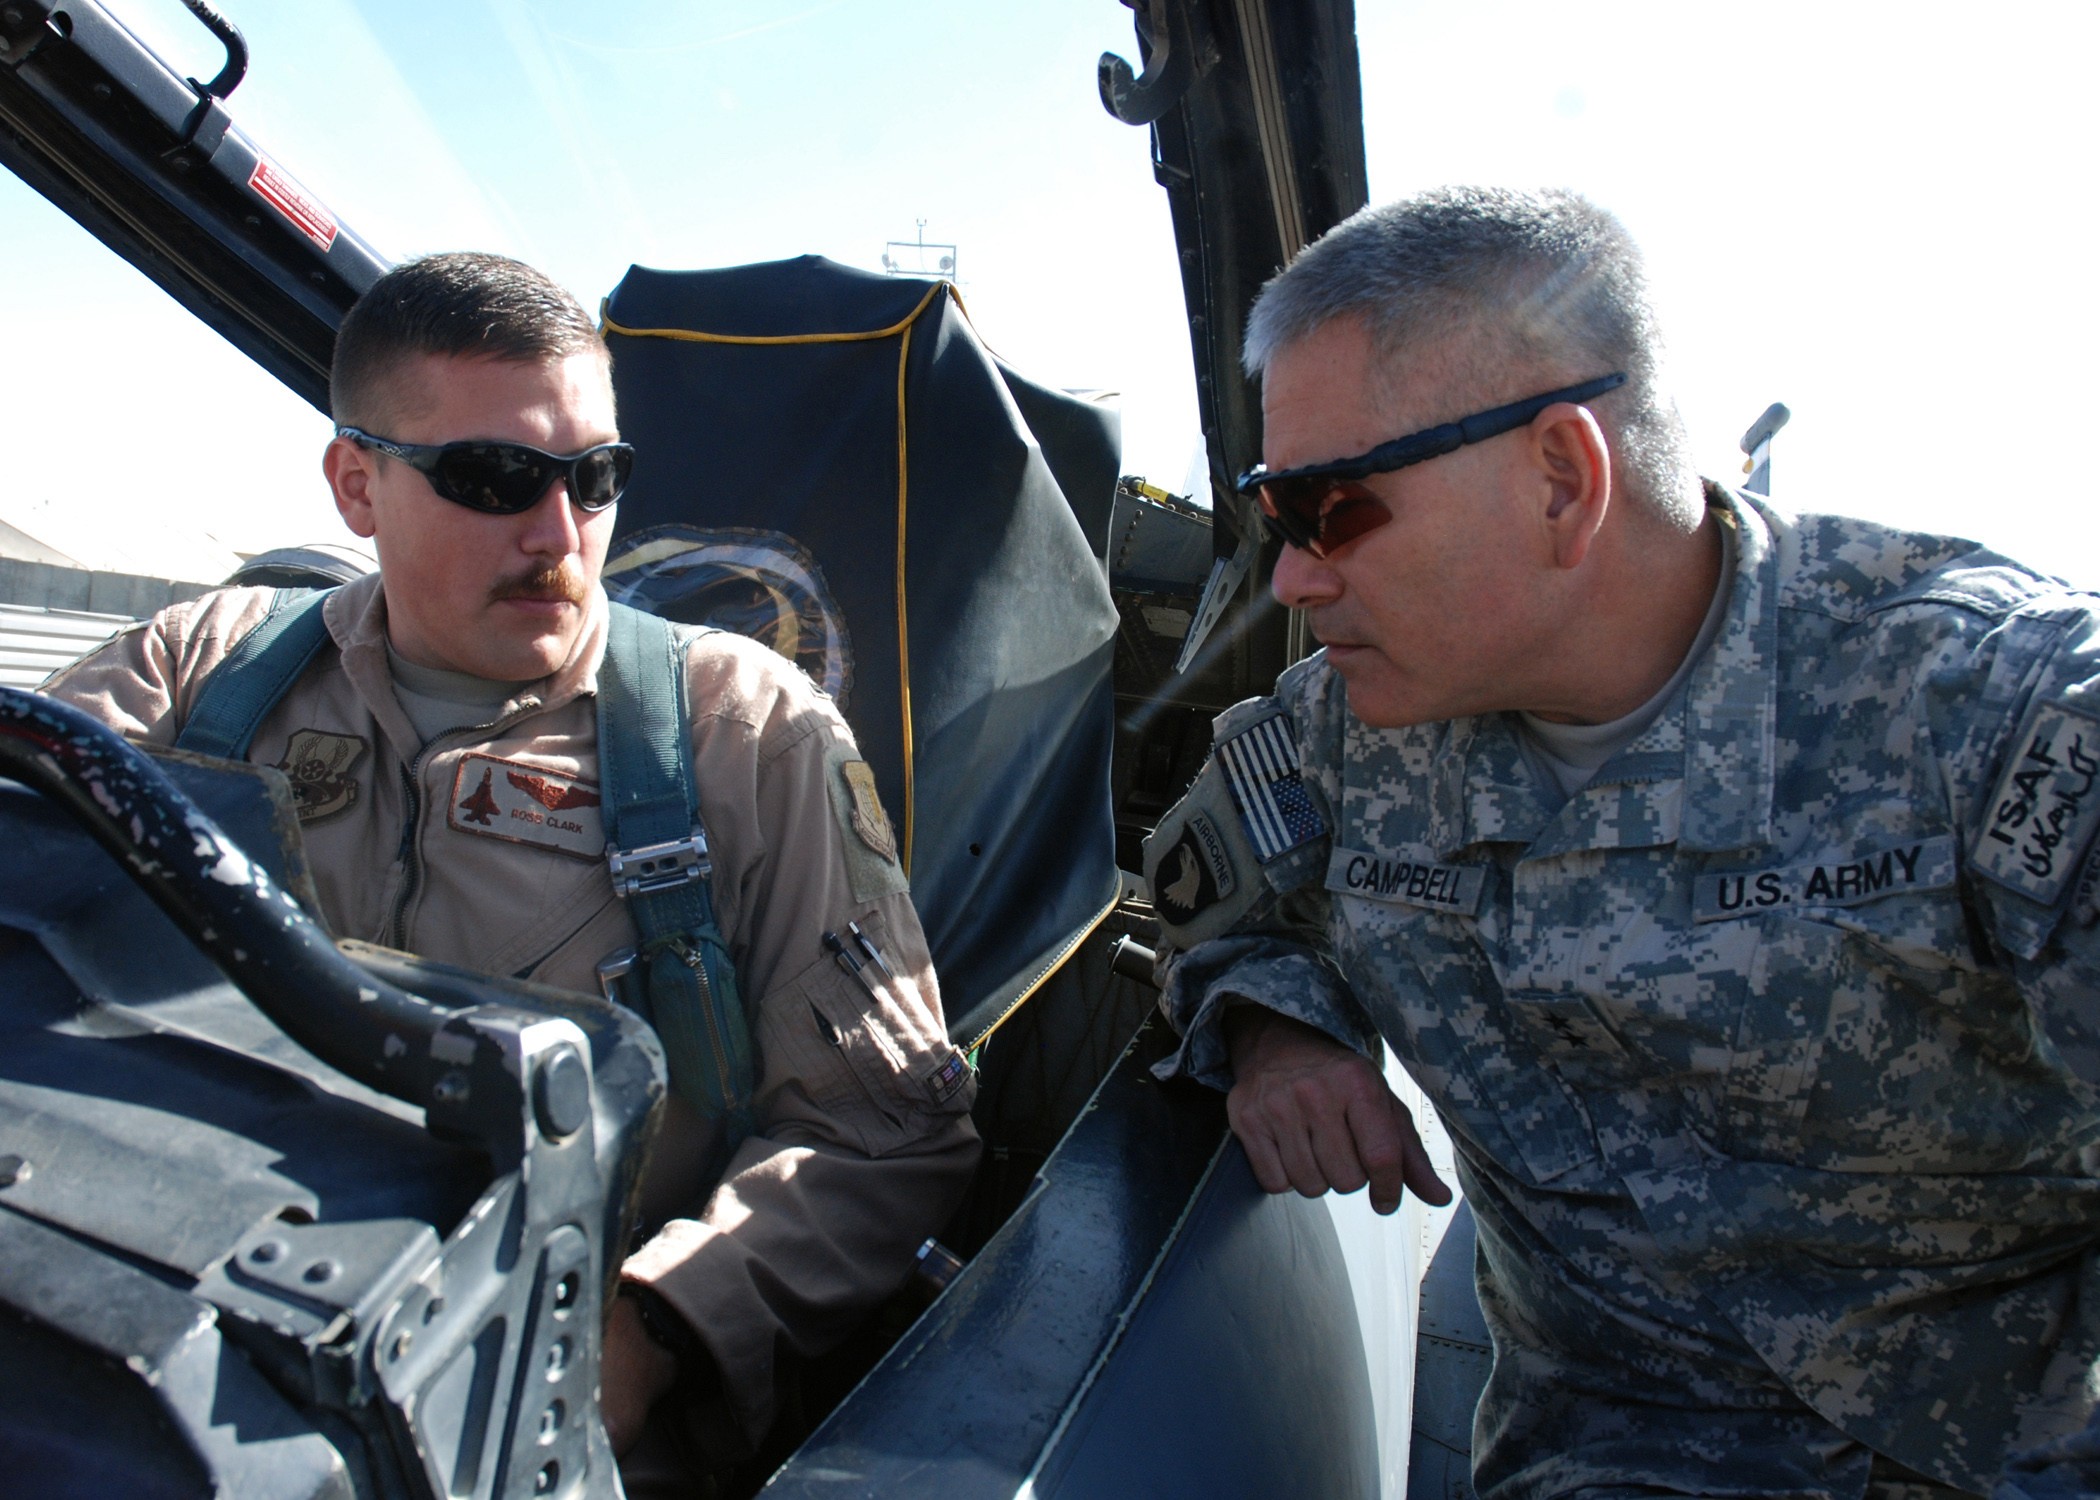 Eagles prepare for flight | Article | The United States Army